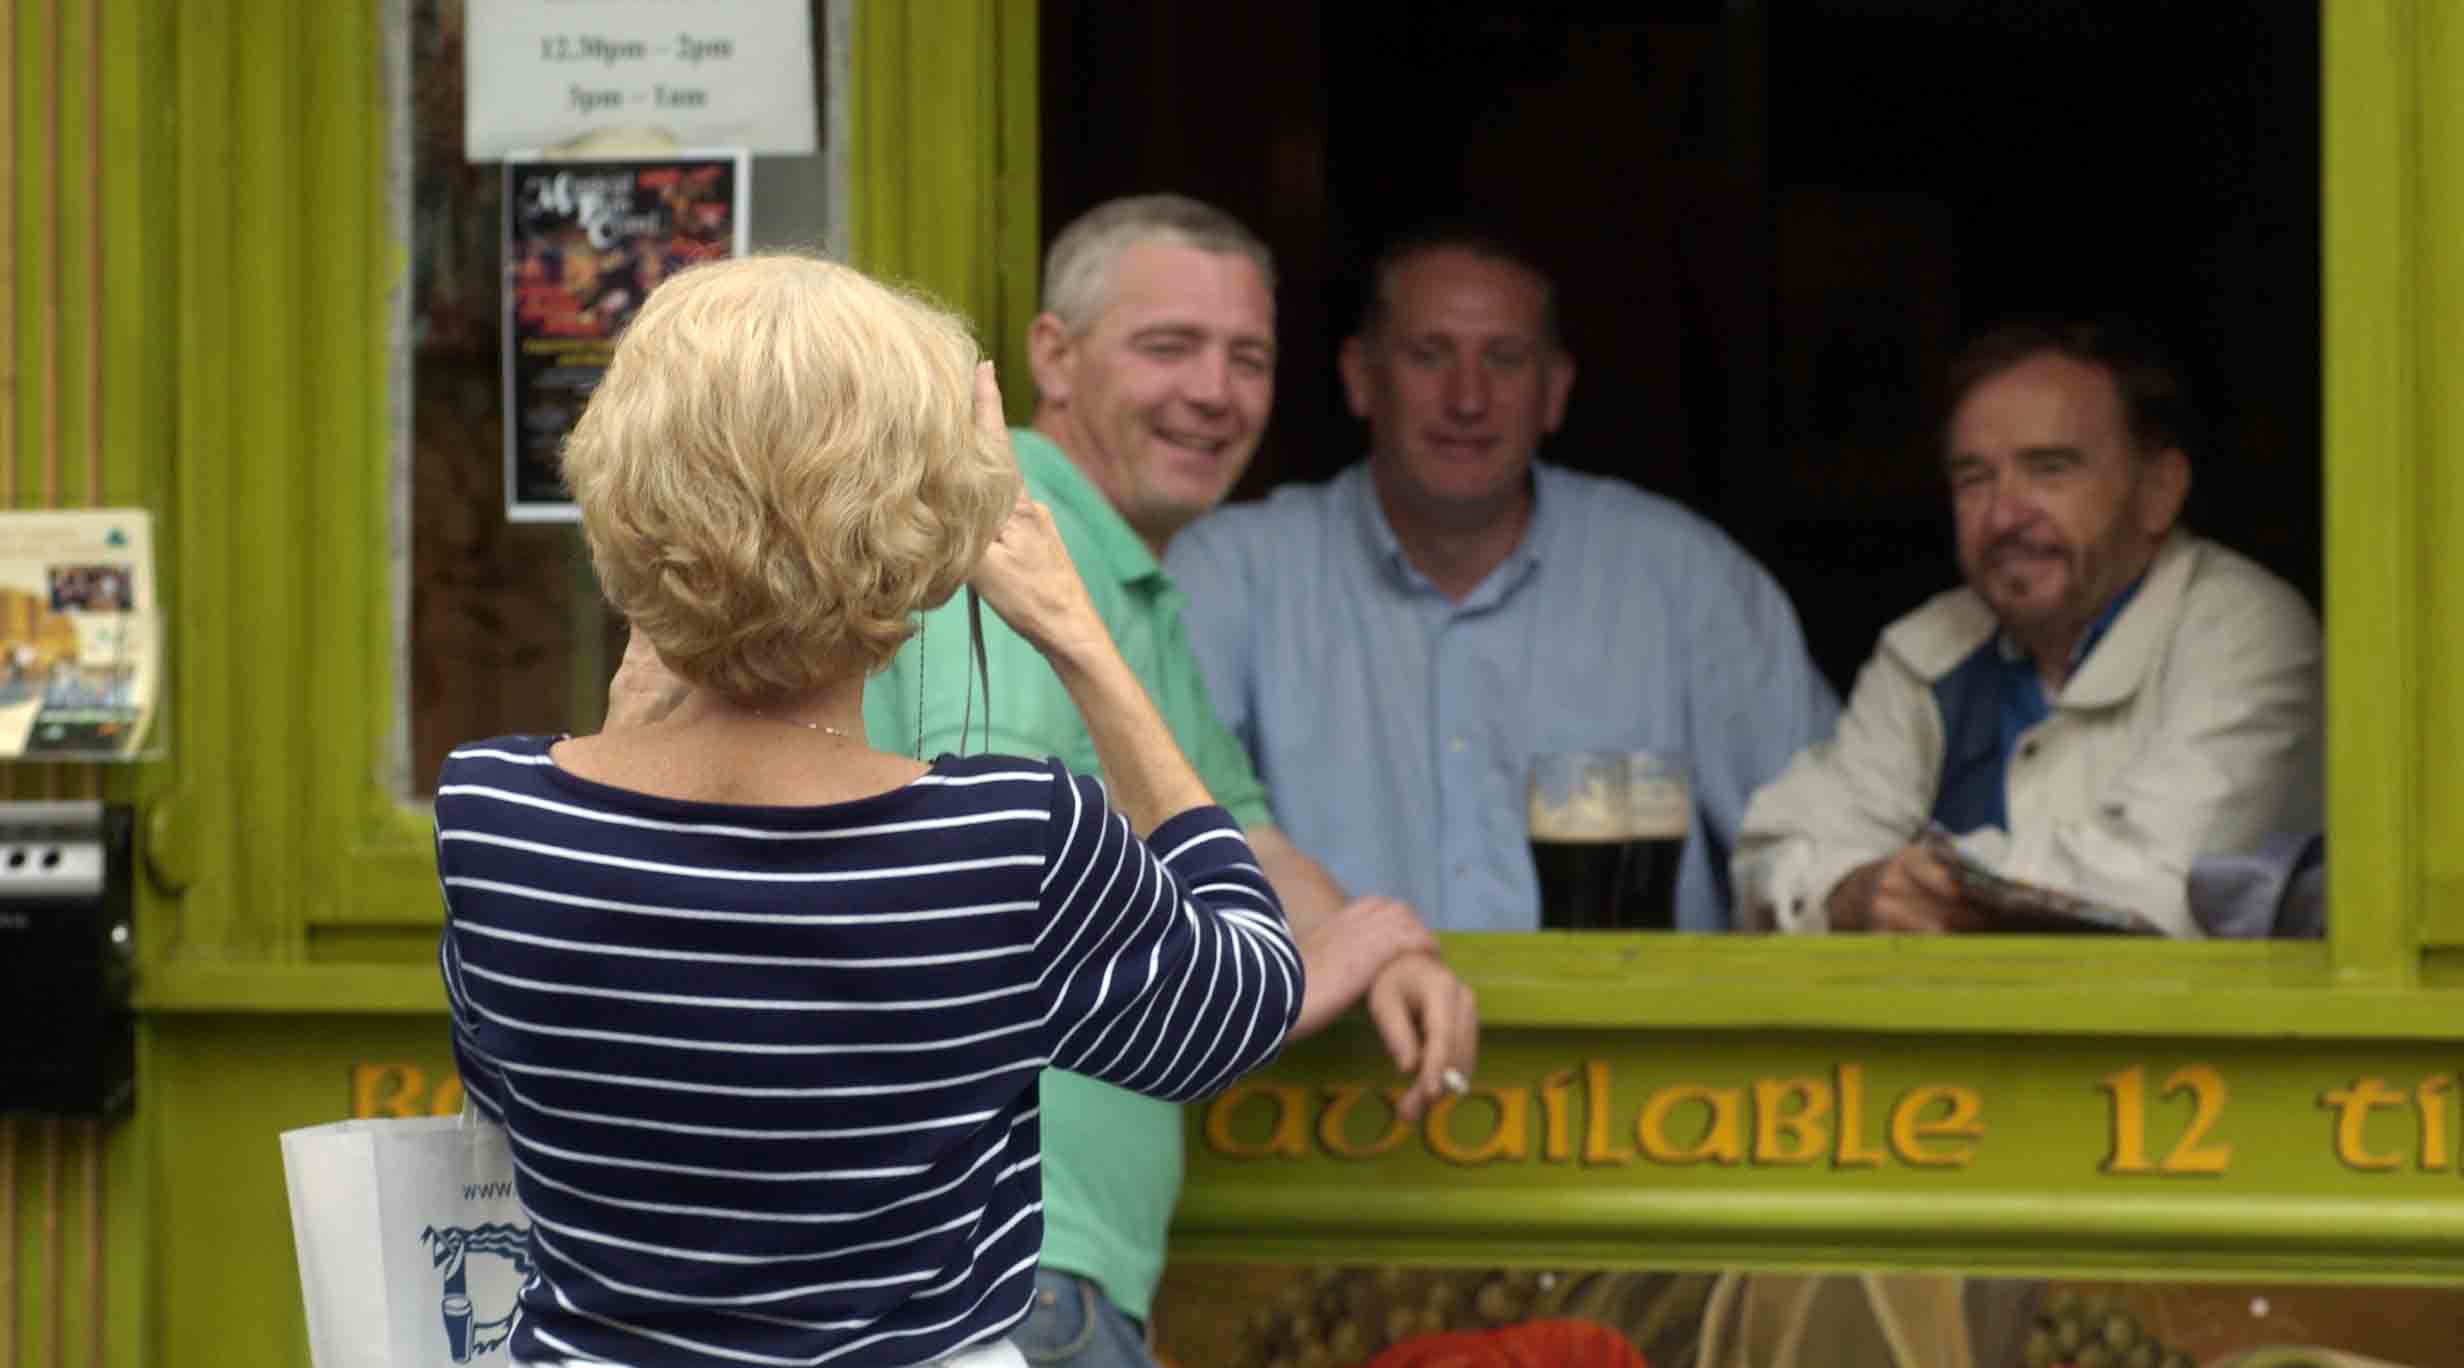 Some 79% of respondents to the Europcar survey stated that visiting an Irish pub was an important part of their experience of Irish culture during their holiday.